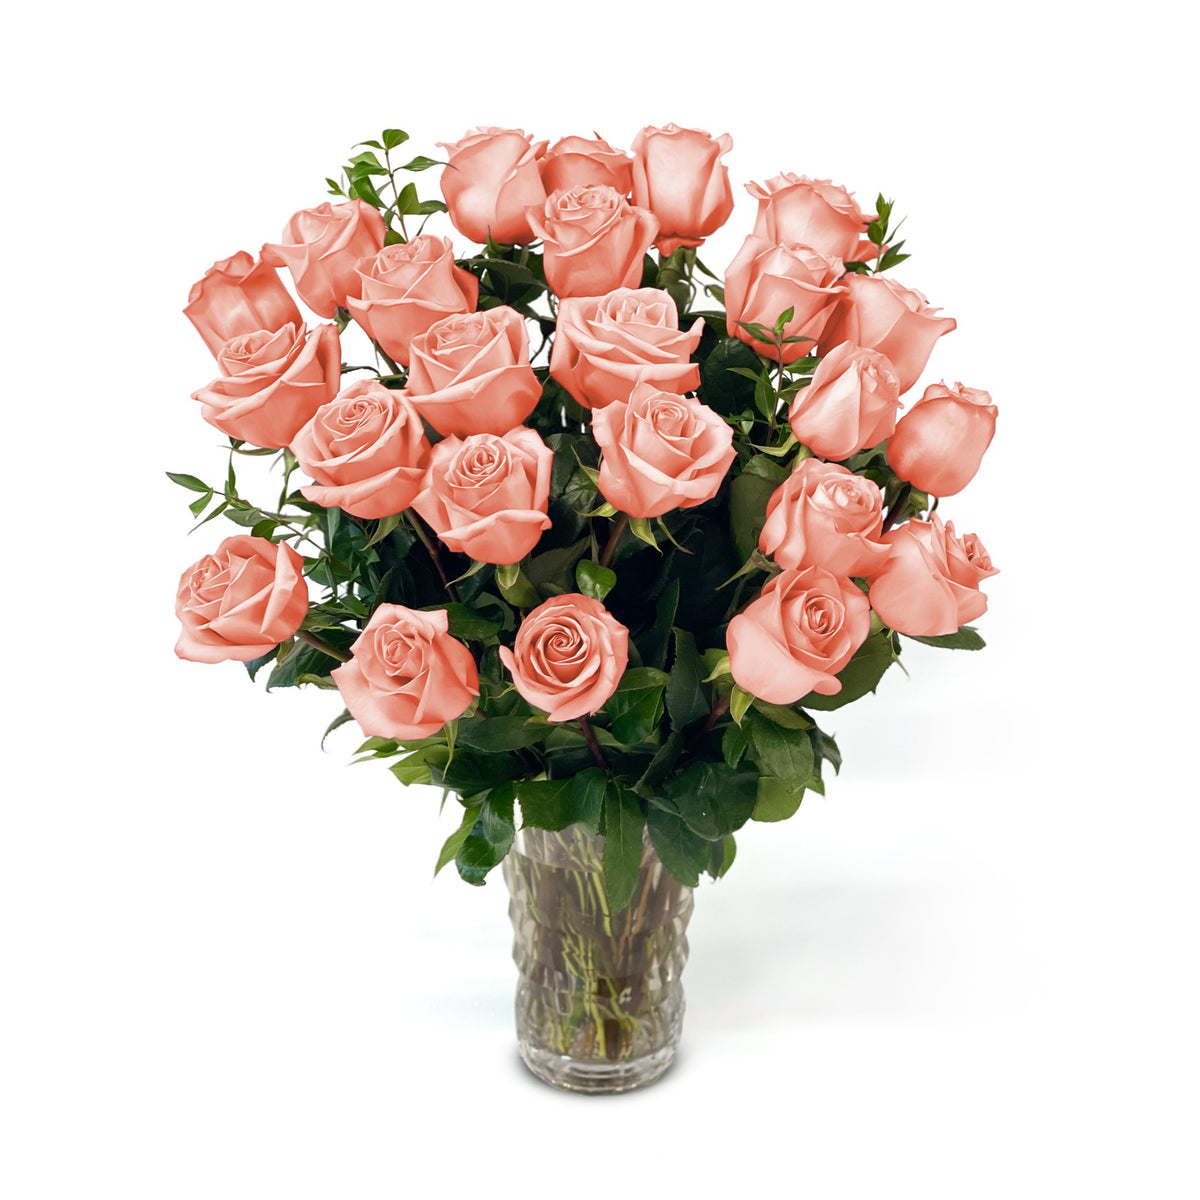 NYC Flower Delivery - Fresh Roses in a Crystal Vase | Peach - 2 Dozen - Roses